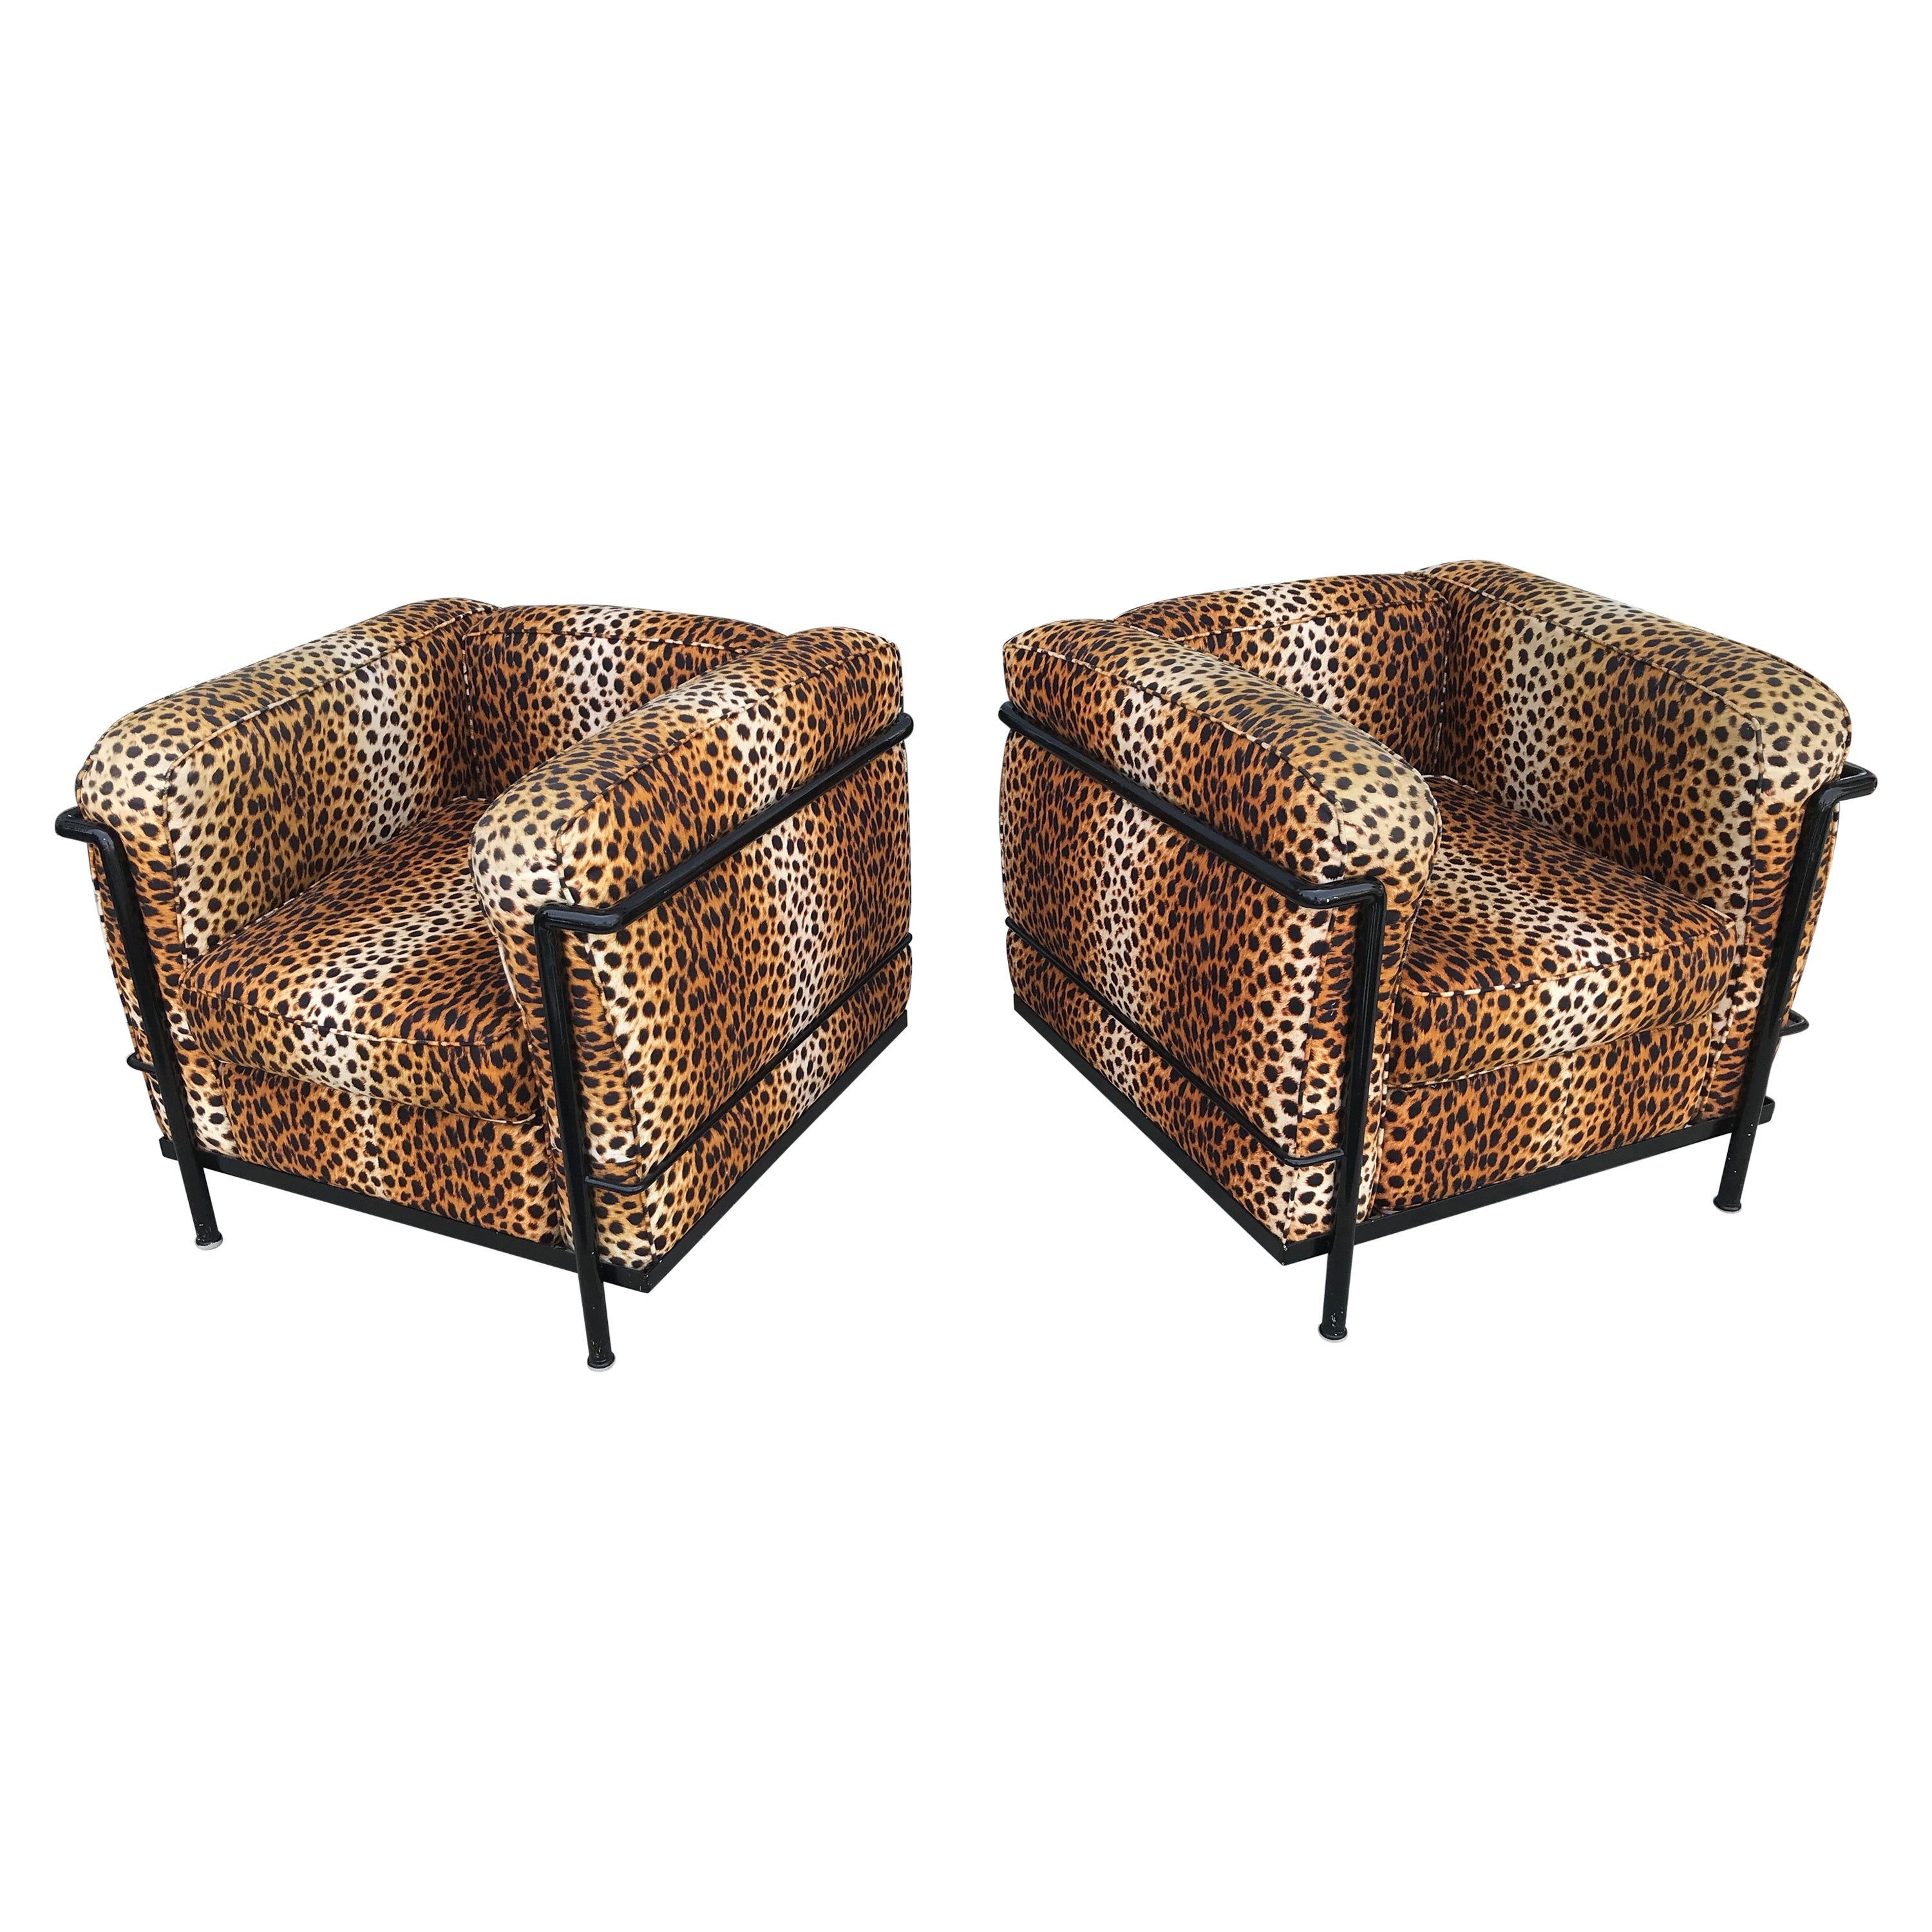 Pair of Art Deco Inspired Club Chairs in "Leopard"